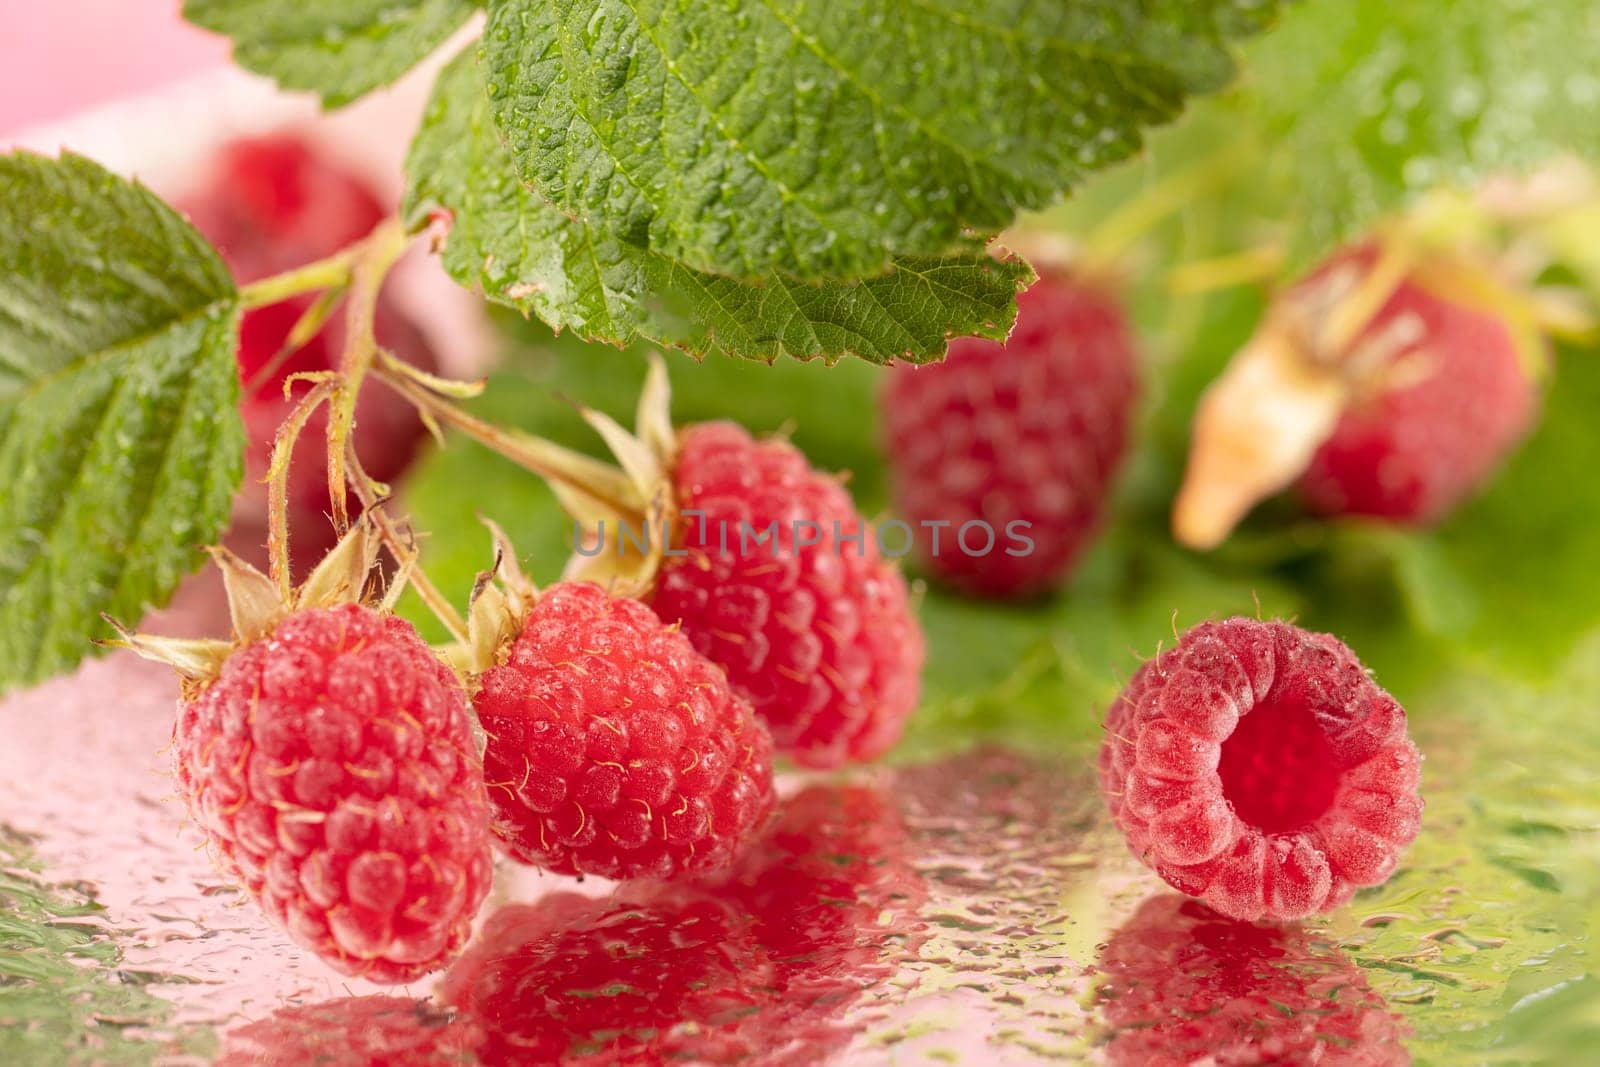 Raspberries with green leaves lie against a golden background.